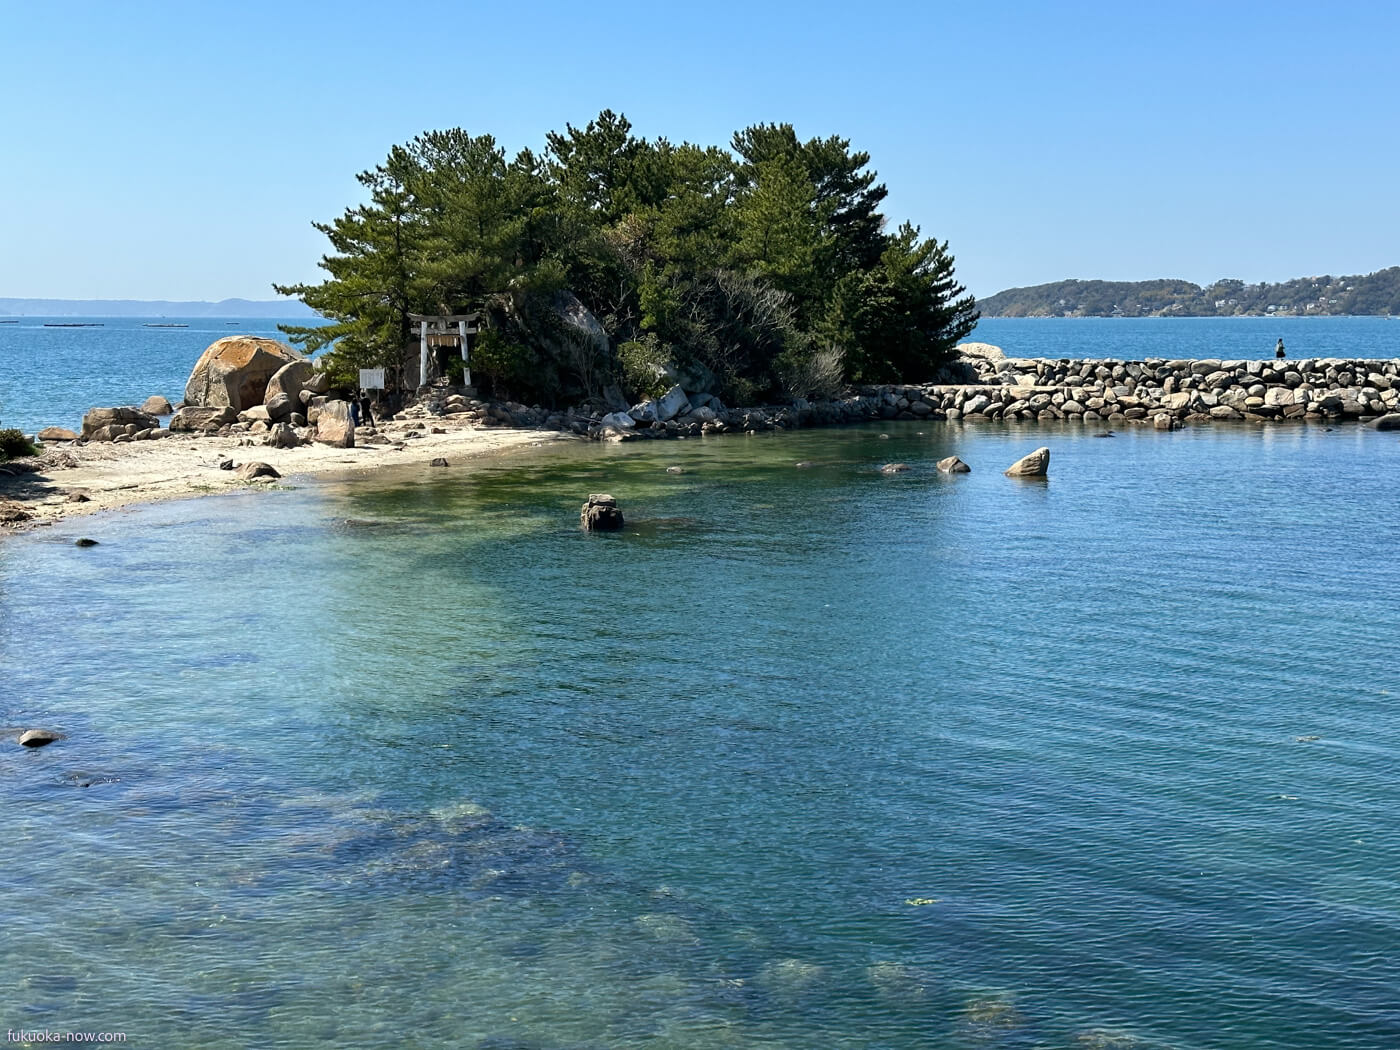 Explore Itoshima by Car: Exploring Further Afield, 車で巡る糸島らしい糸島